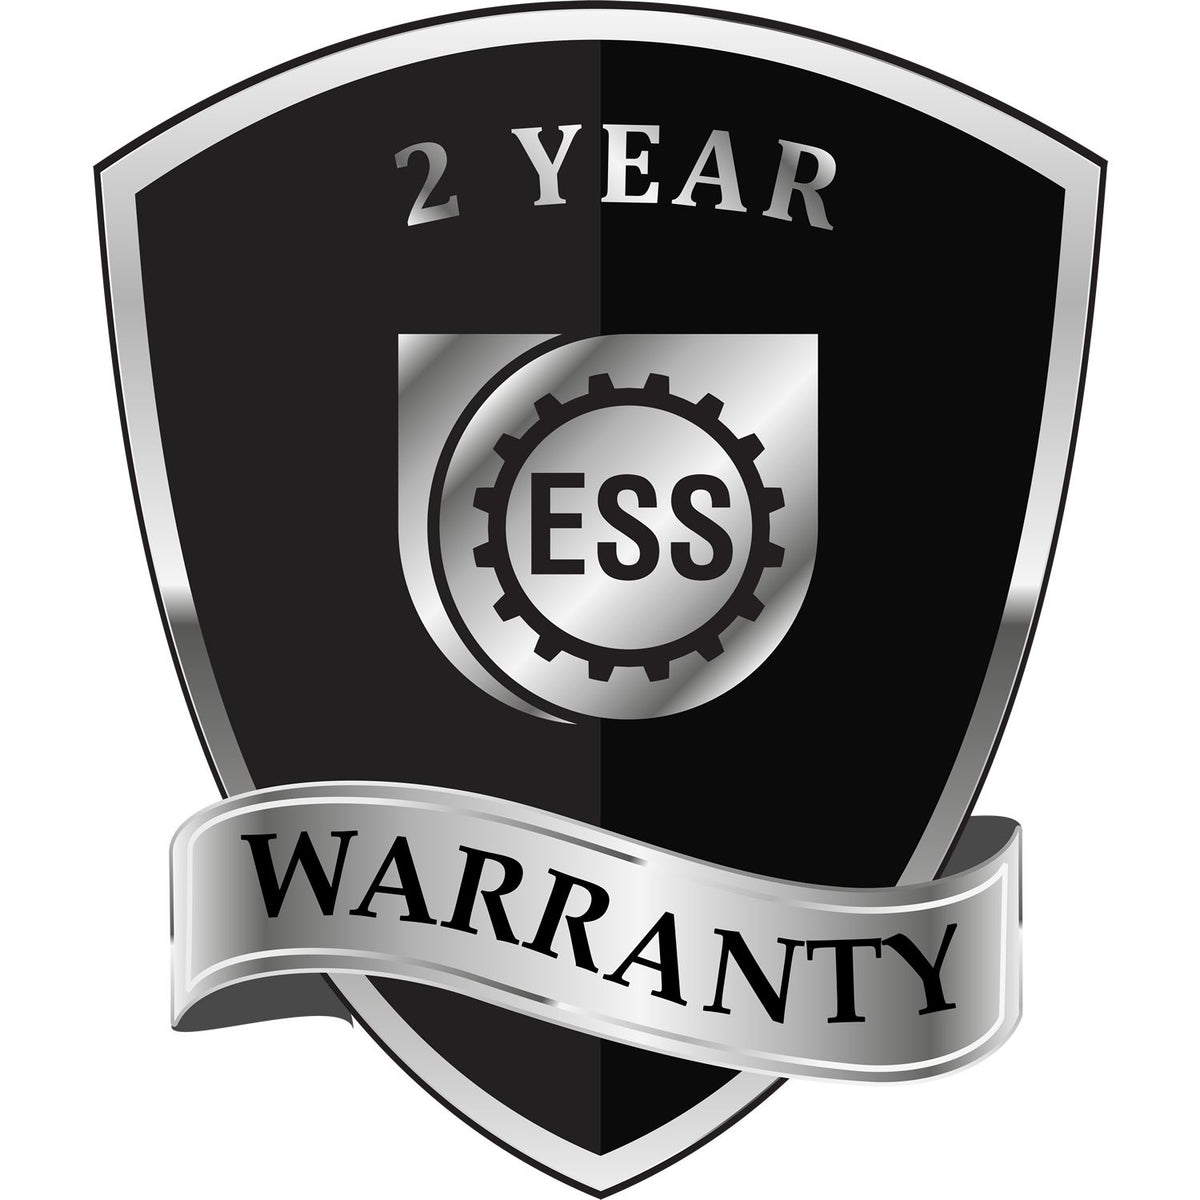 A badge or emblem showing a warranty icon for the Heavy Duty Cast Iron New Jersey Architect Embosser